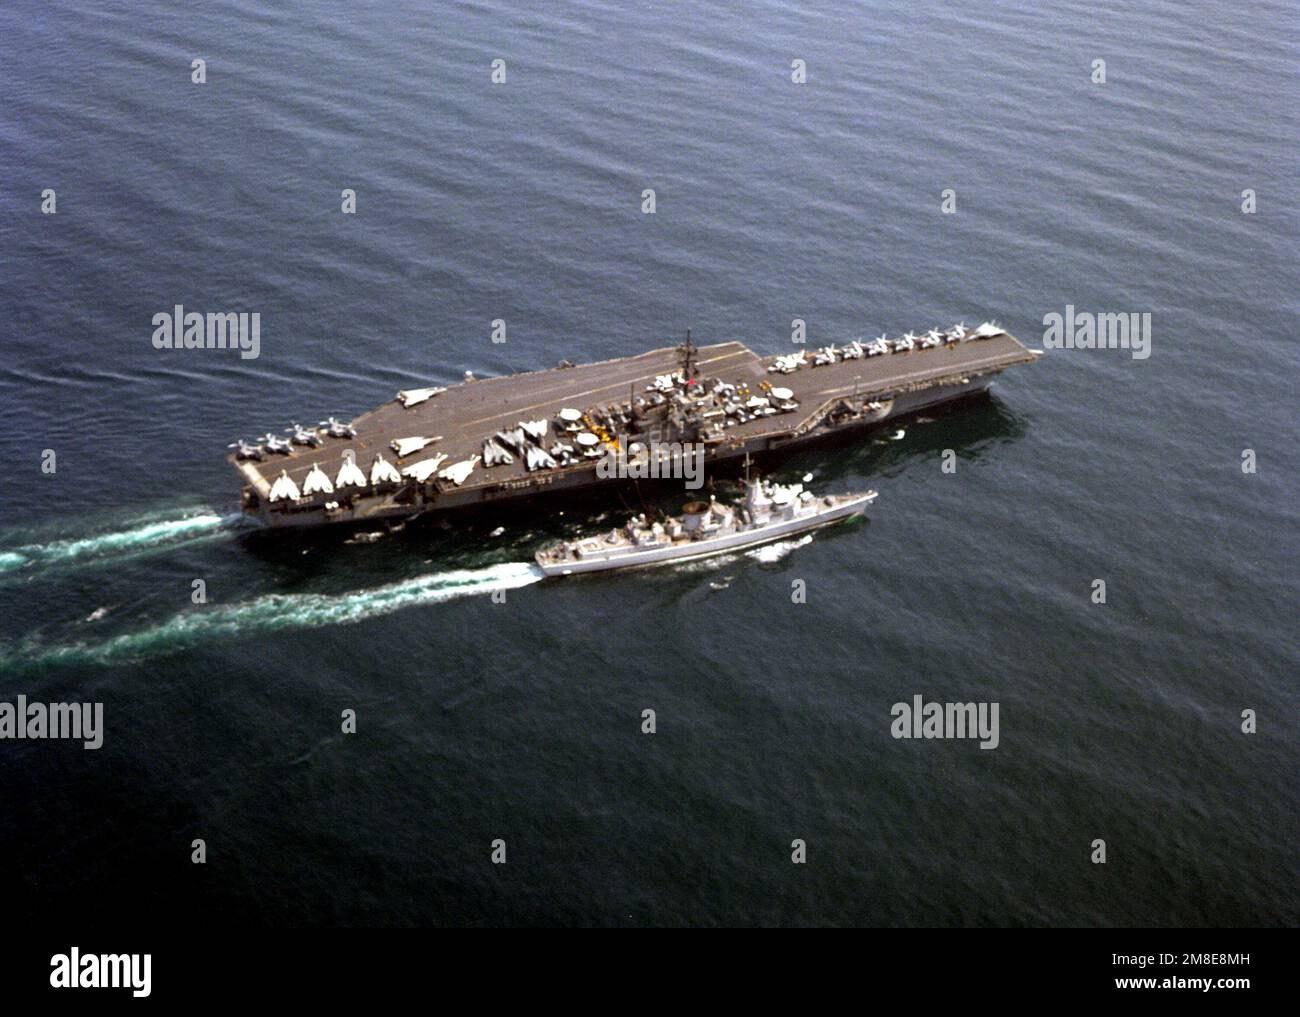 A starboard bow view of the aircraft carrier USS RANGER (CV-61) conducting an underway replenishment with the Dutch frigate Hr Ms Jacob Van Heemskerck (F-812) during Operations Desert Shield/Storm. Subject Operation/Series: DESERT STORMDESERT SHIELD Country: Unknown Stock Photo